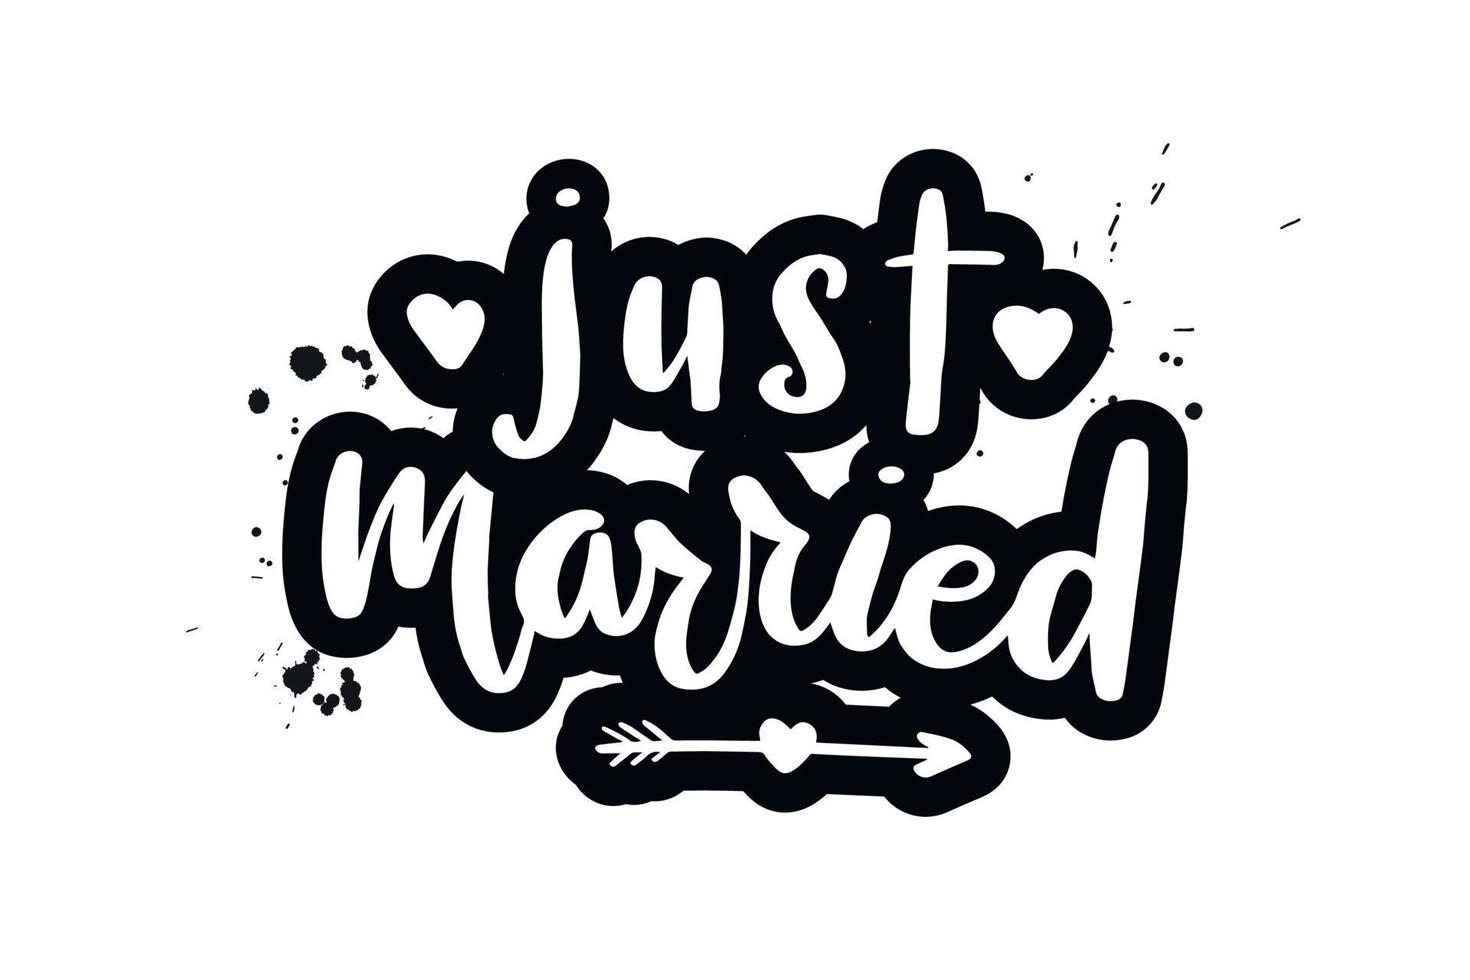 Inspirational handwritten brush lettering just married. Vector calligraphy illustration isolated on white background. Typography for banners, badges, postcard, t shirt, prints, posters.